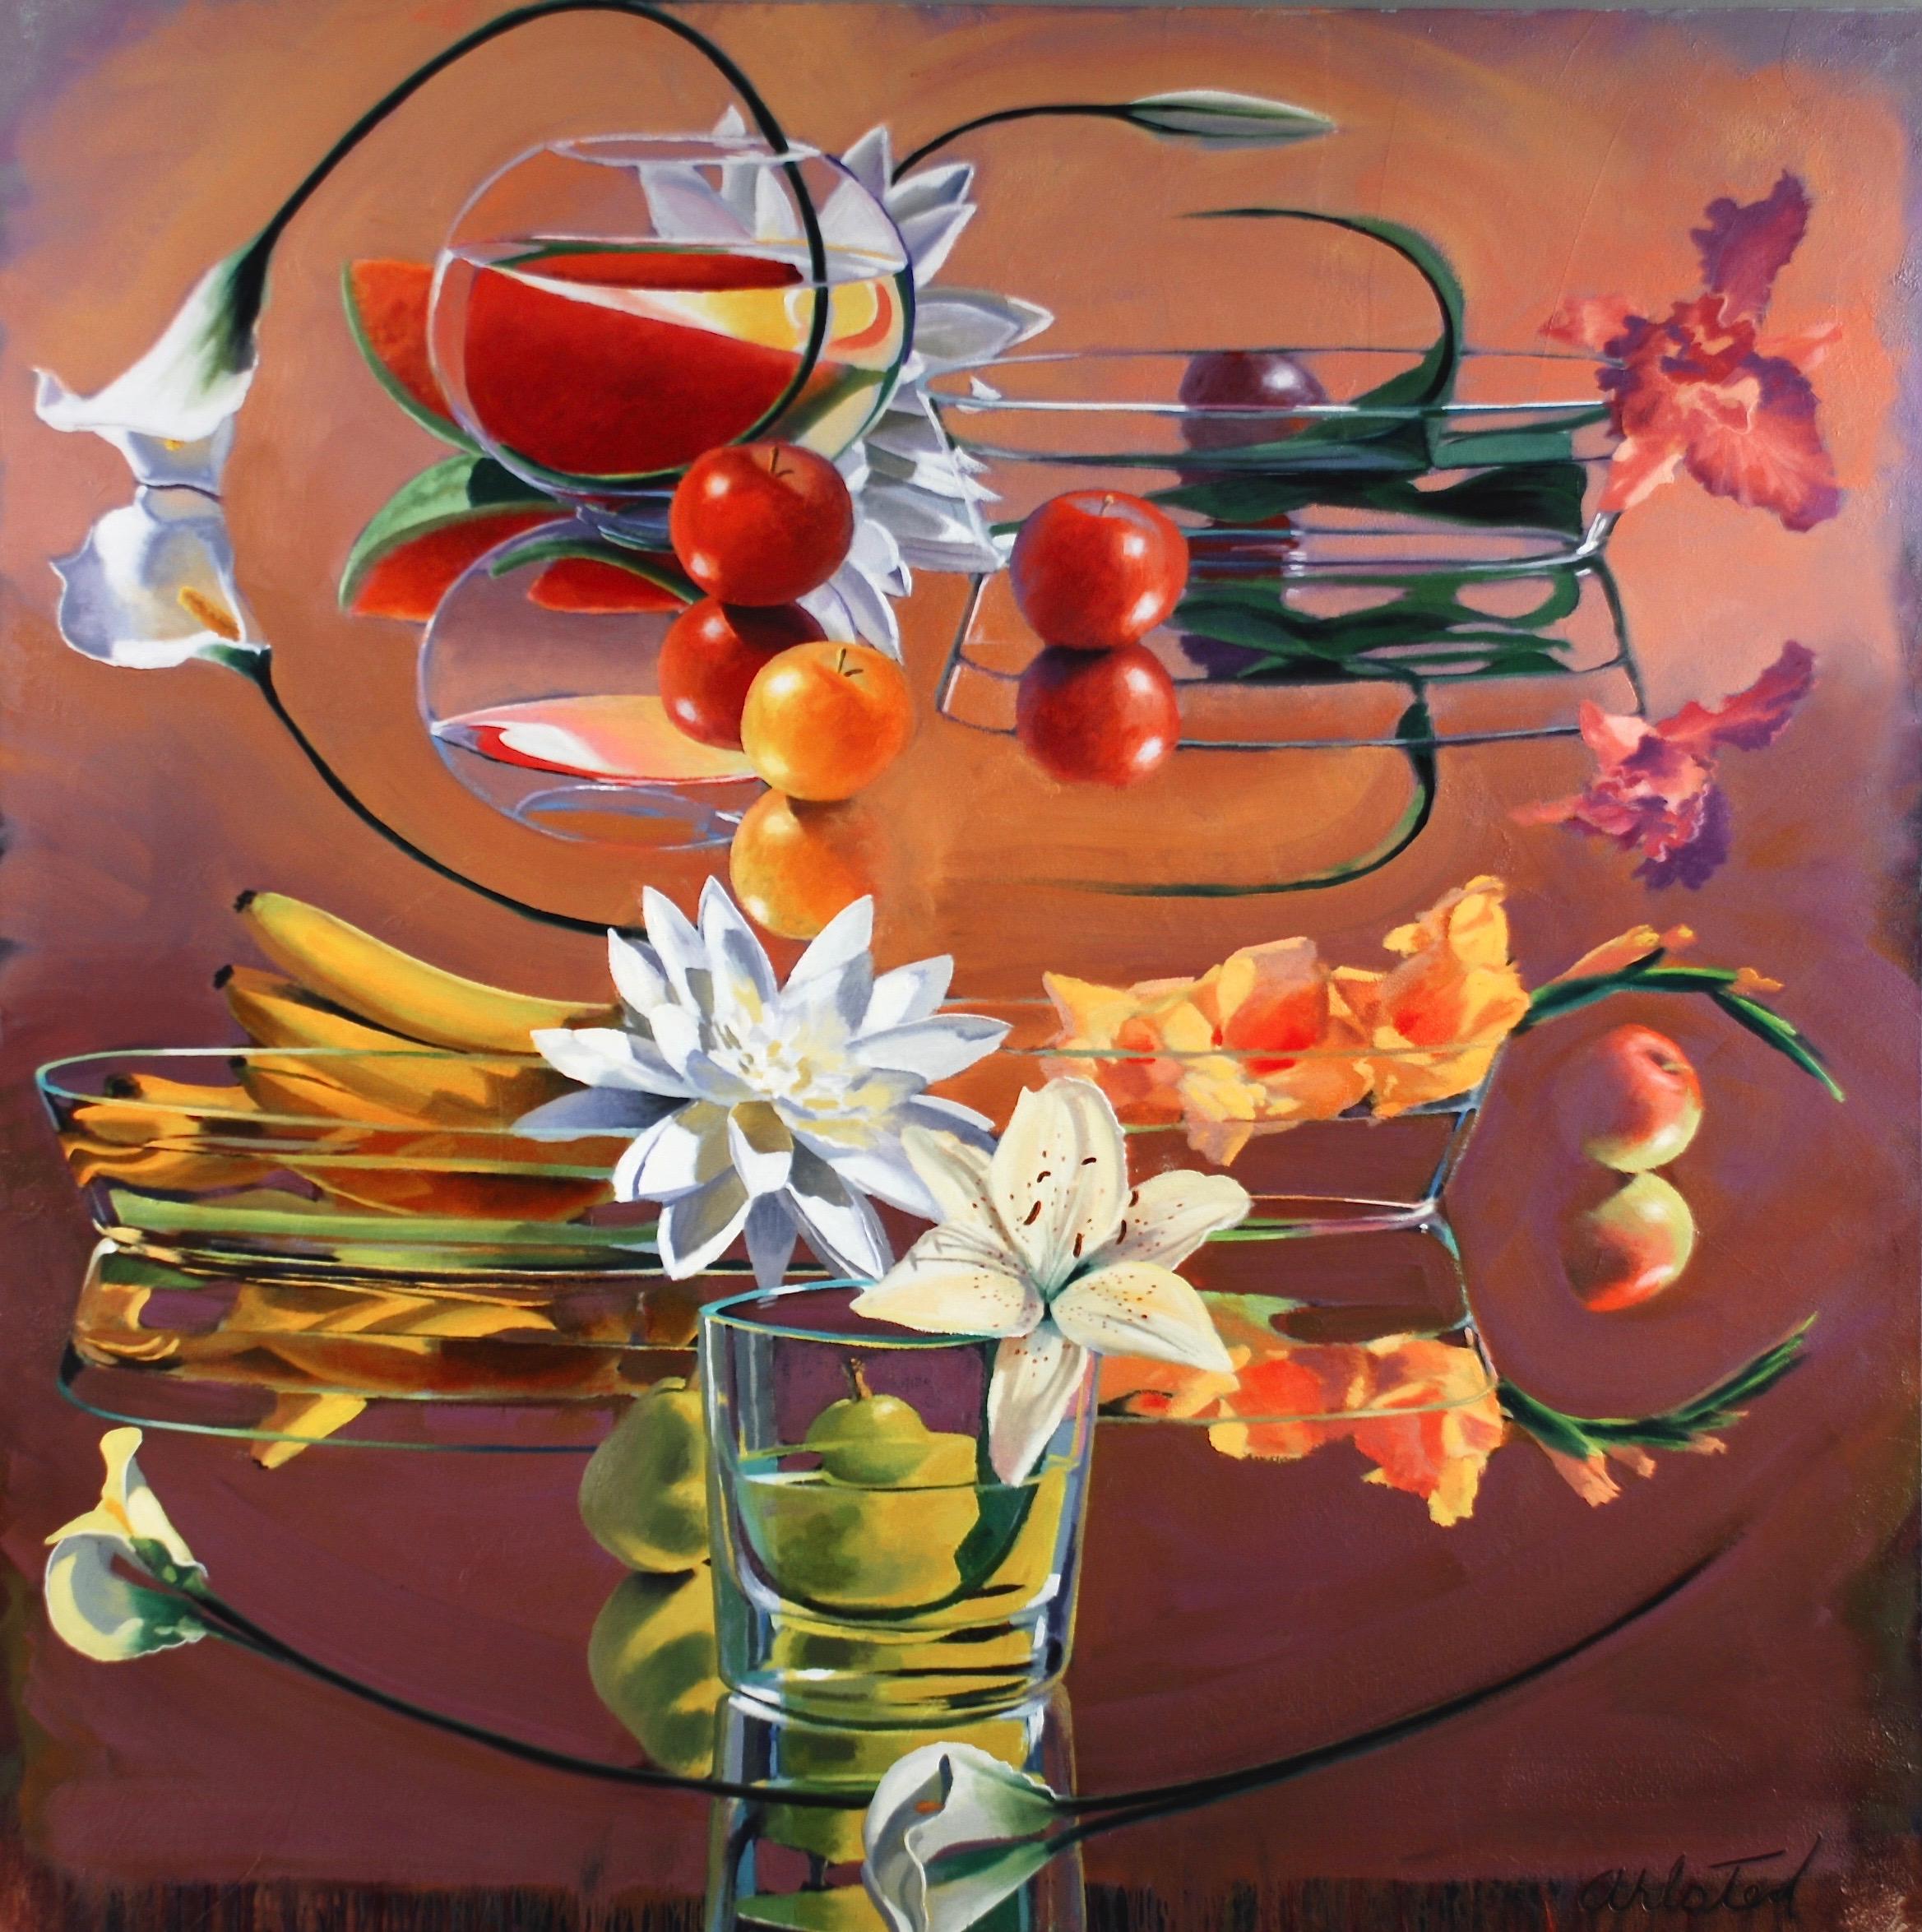 David Ahlsted
“ Fruit & Flowers “, Oil on Canvas, 60 x 60”, Retail Price $ 8,000.00

David Ahlsted is an American artist known for his paintings of the Jersey Shore, industrial landscapes, and large scale still-life works. His work is described as